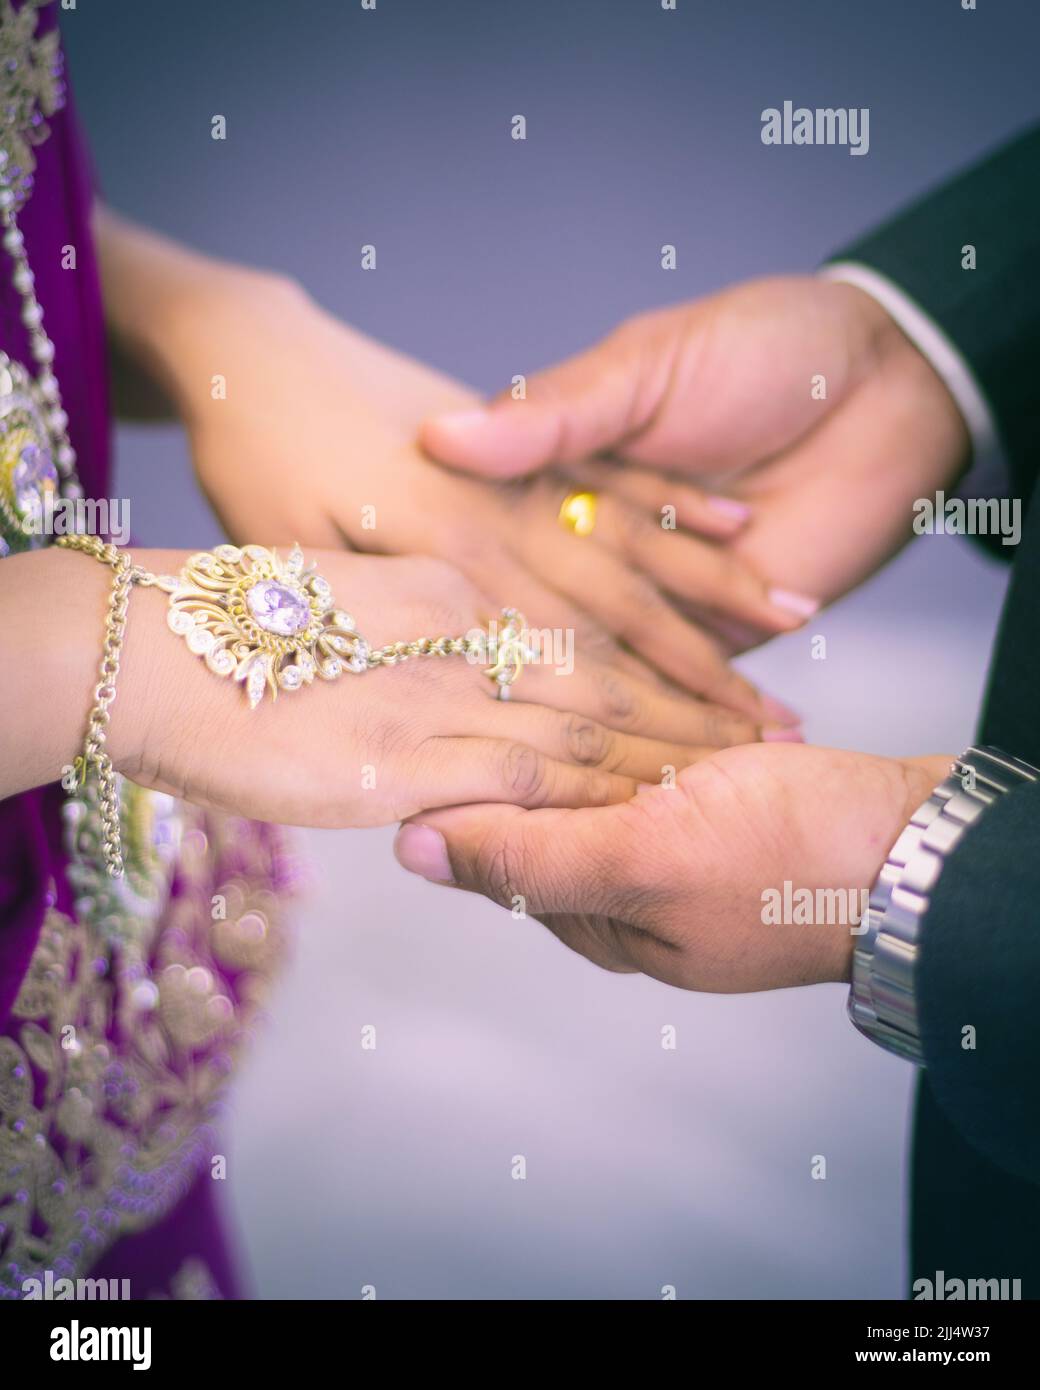 Newlyweds hands, groom holding bride's hands. Concept of the beginning of the new journey. Stock Photo